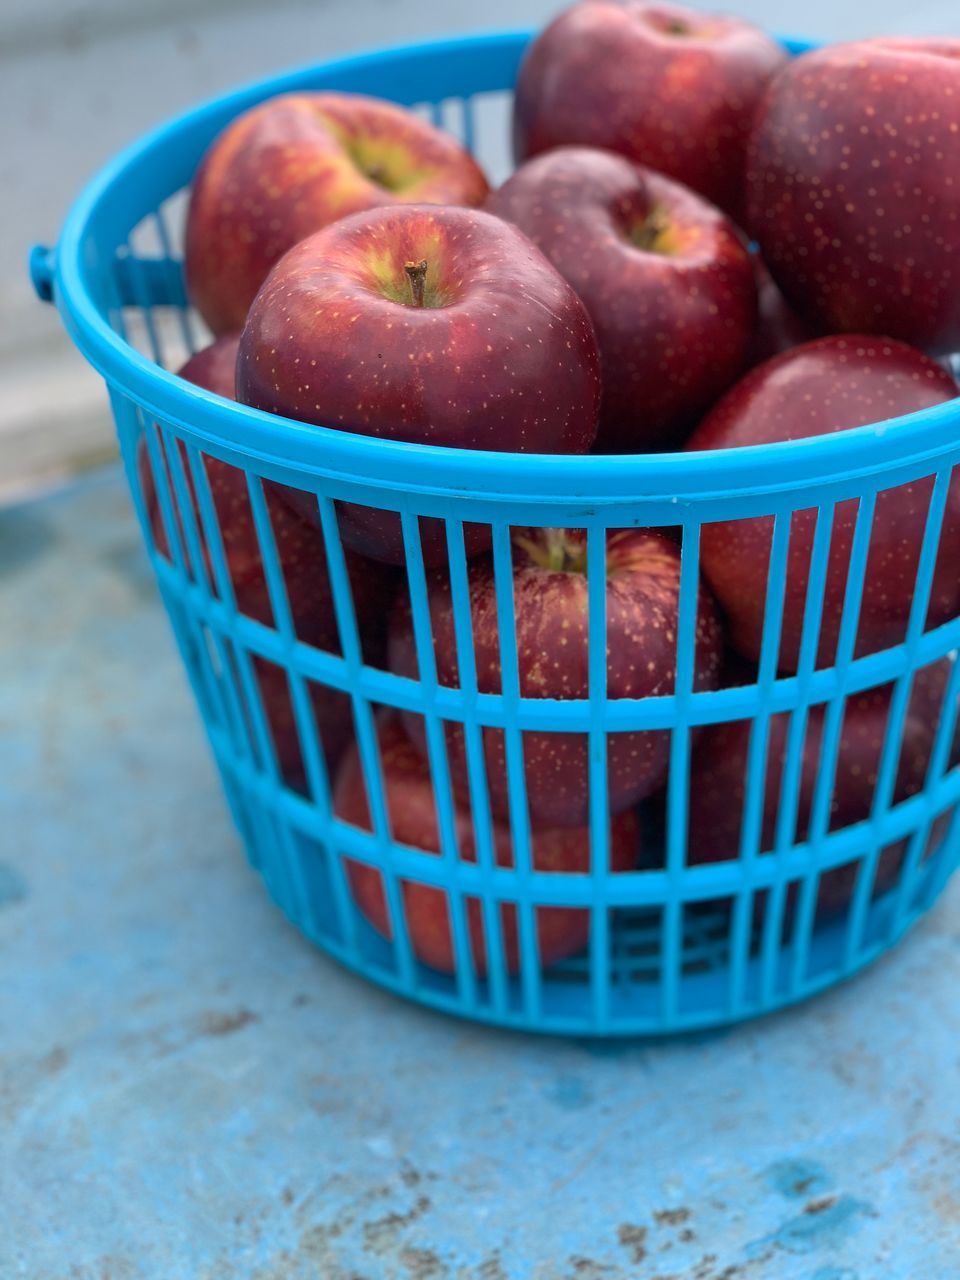 CLOSE-UP OF APPLES IN BASKET ON TABLE